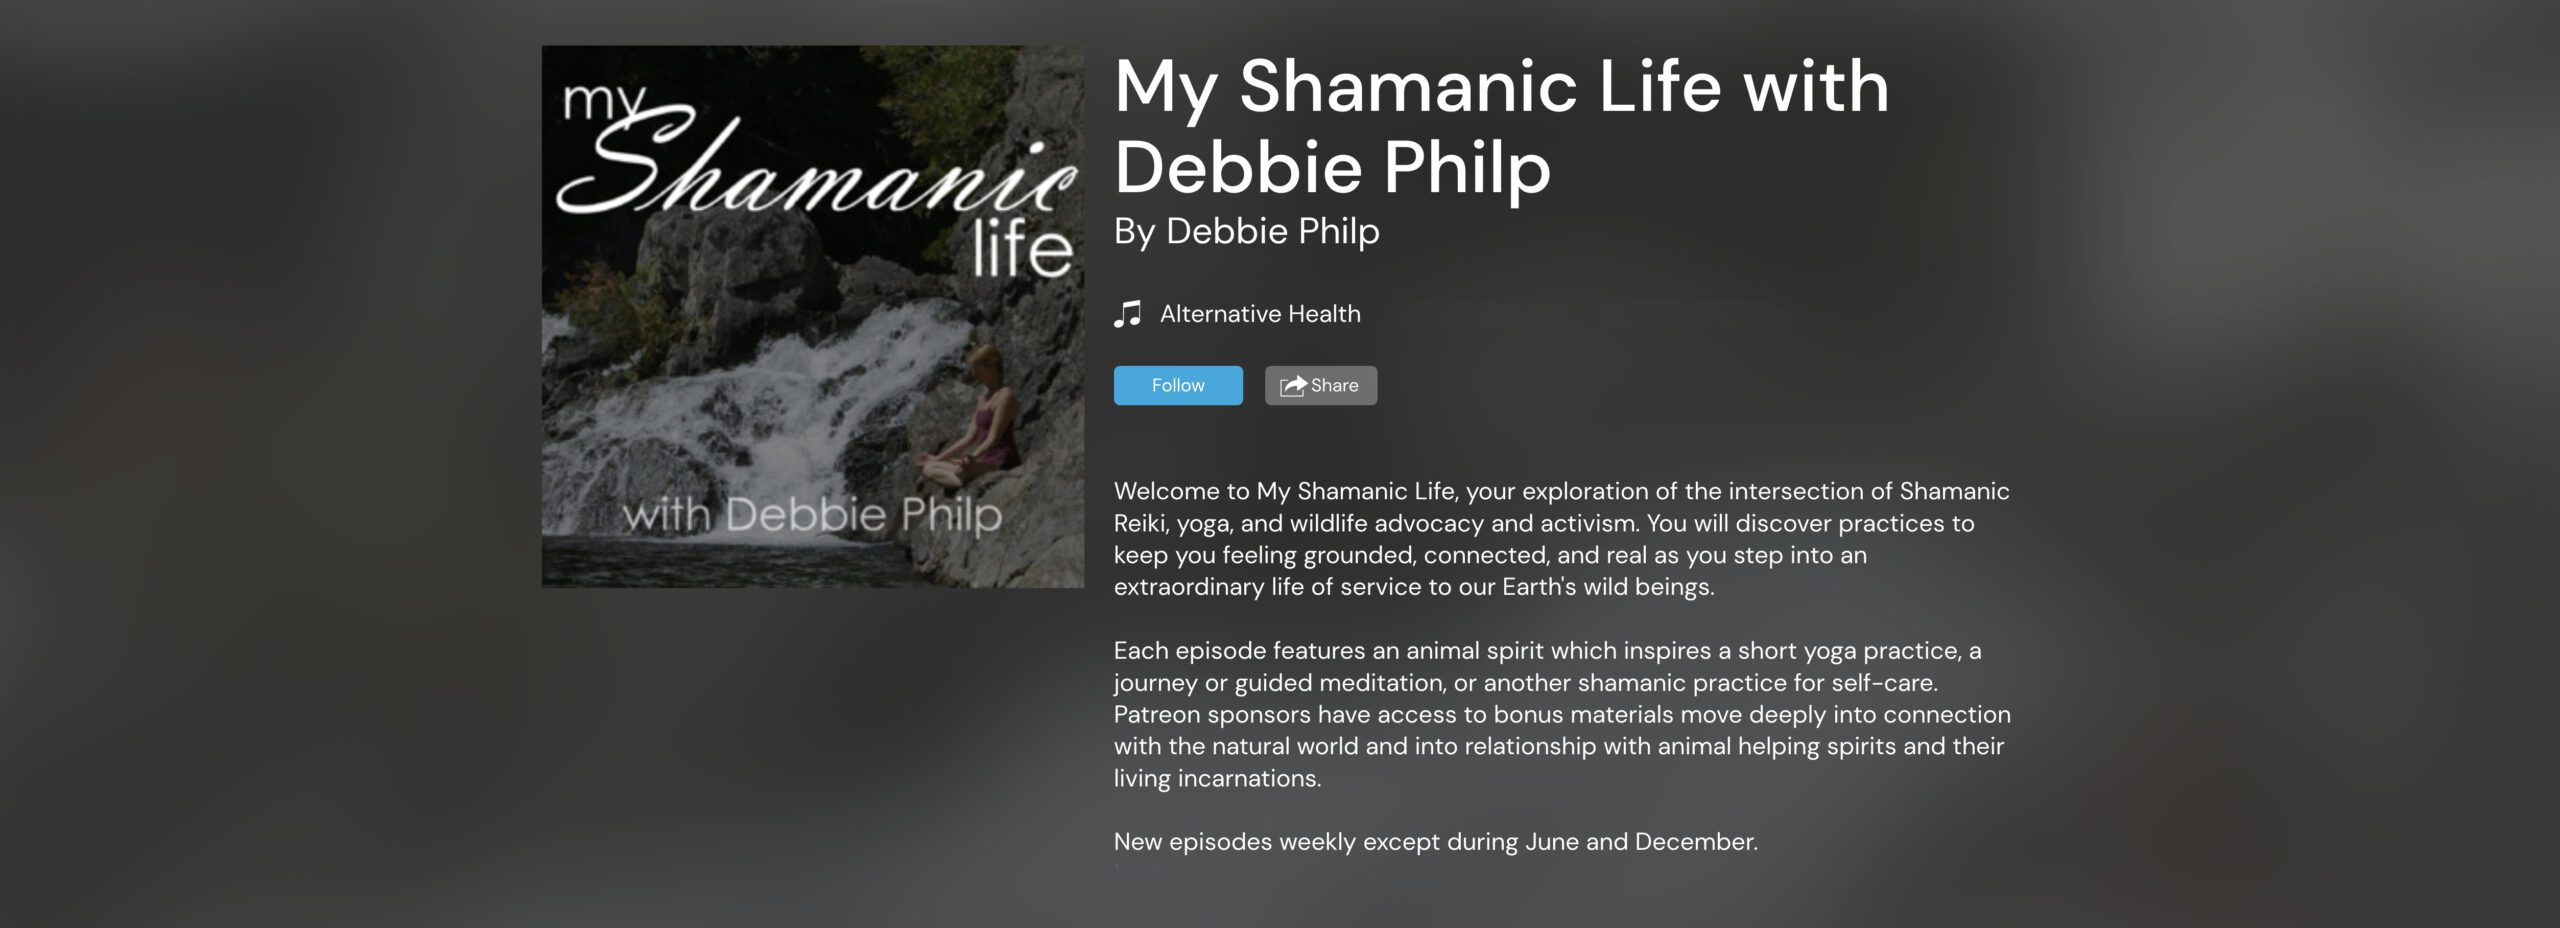 My Shamanic Life podcast channel